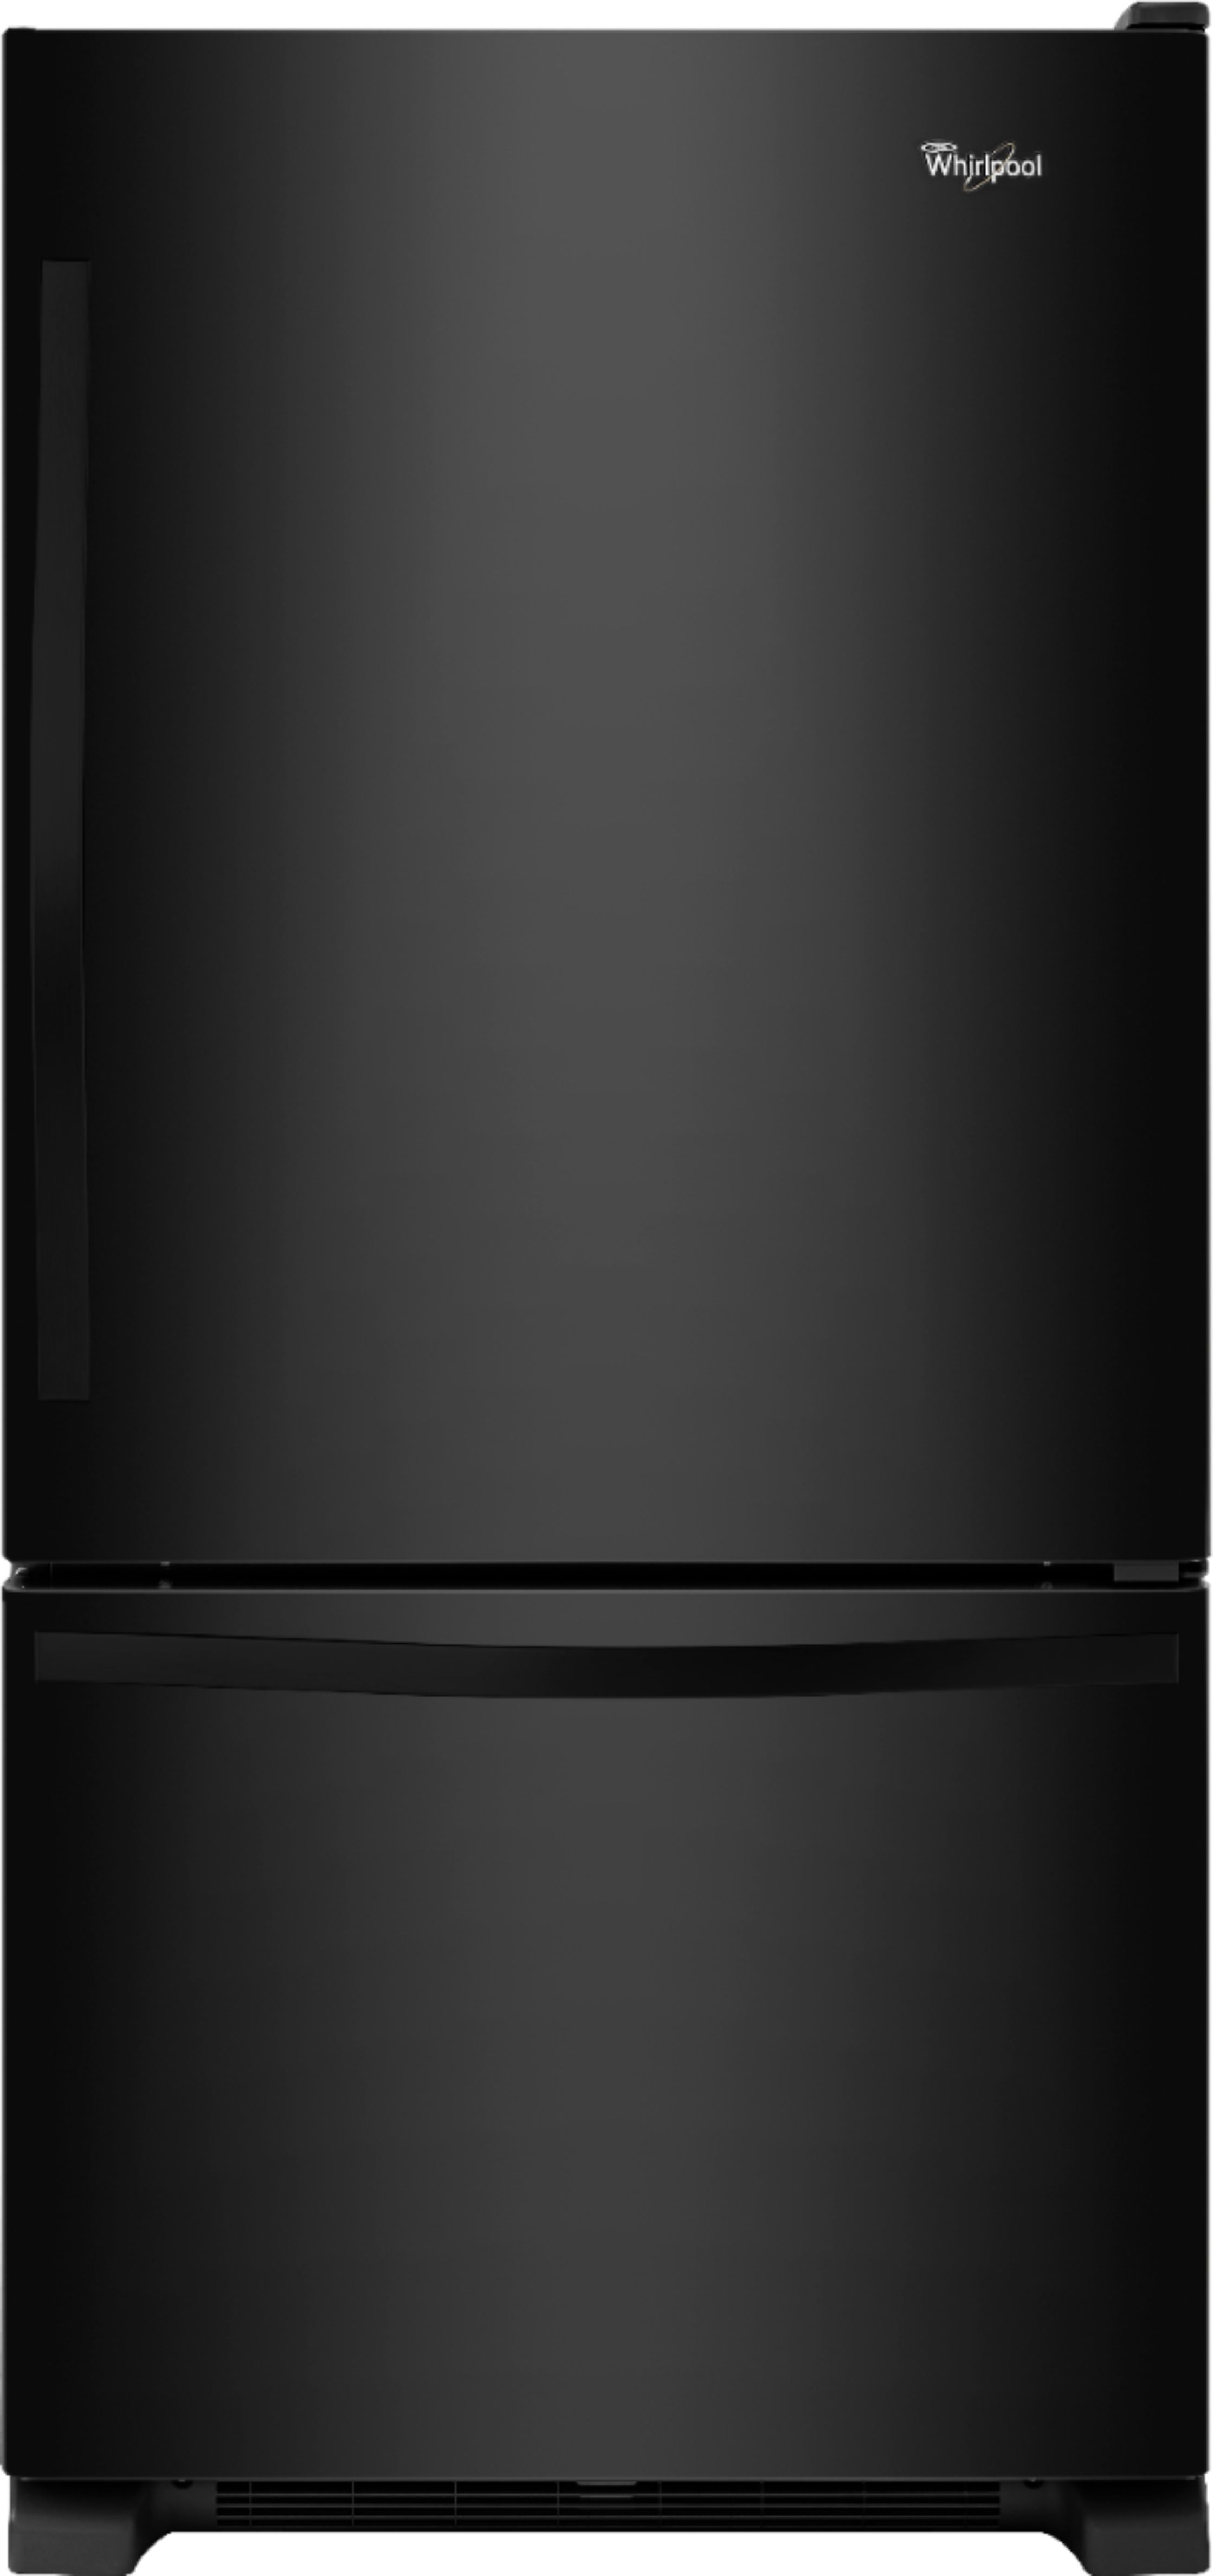 Questions And Answers Whirlpool 21 9 Cu Ft Bottom Freezer Refrigerator Black Wrb322dmbb Best Buy